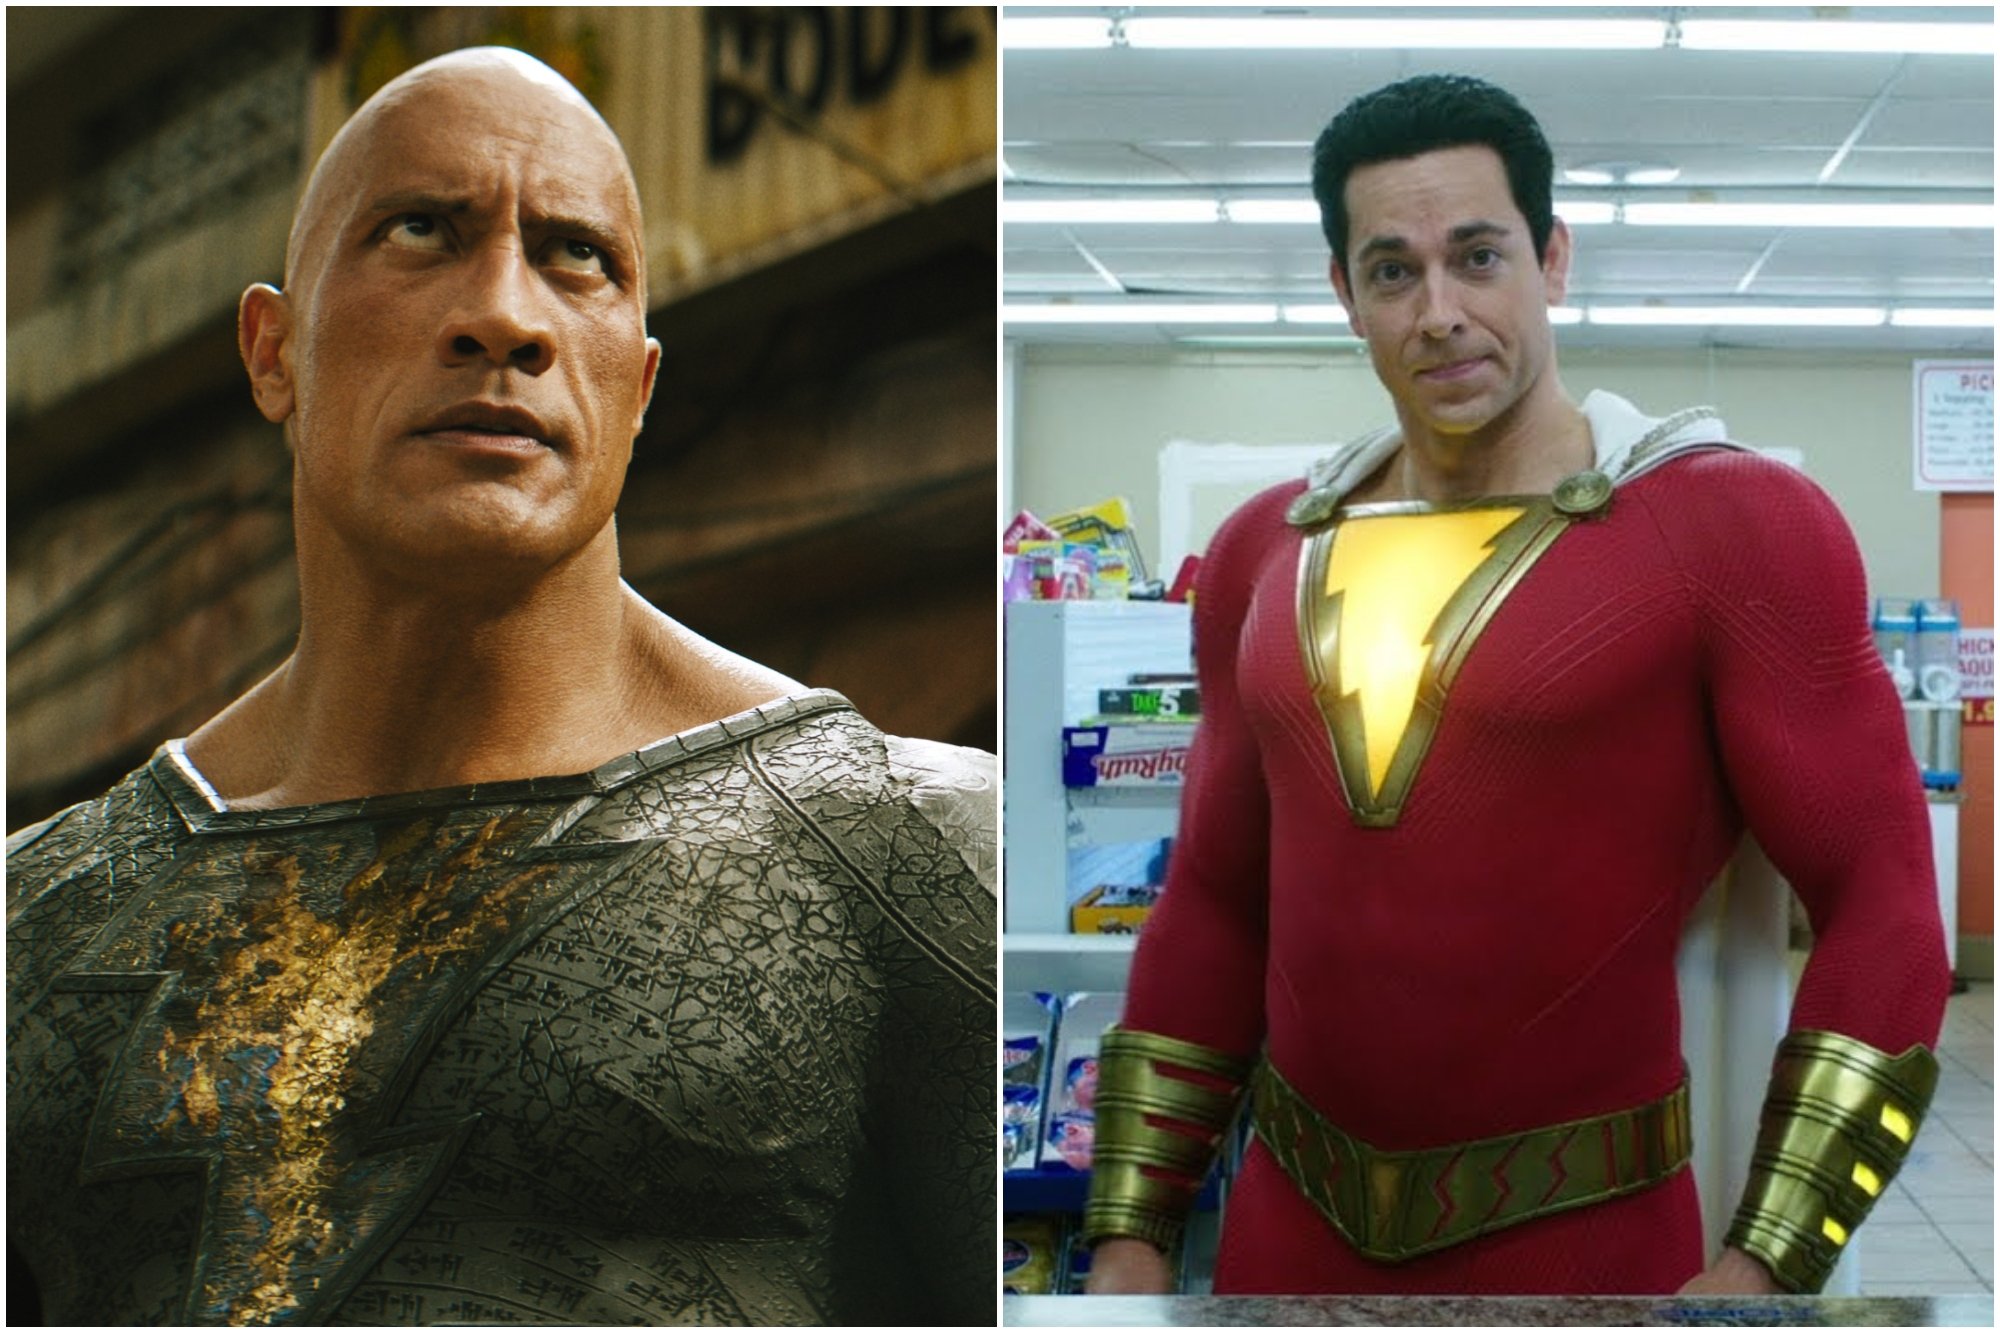 'Black Adam' Dwayne 'The Rock' Johnson as Black Adam, Zachary Levi as Shazam in 'Shazam!' Black Adam is looking off to the side with a serious look. Shazam is looking straight ahead with a slight smile inside of a store.